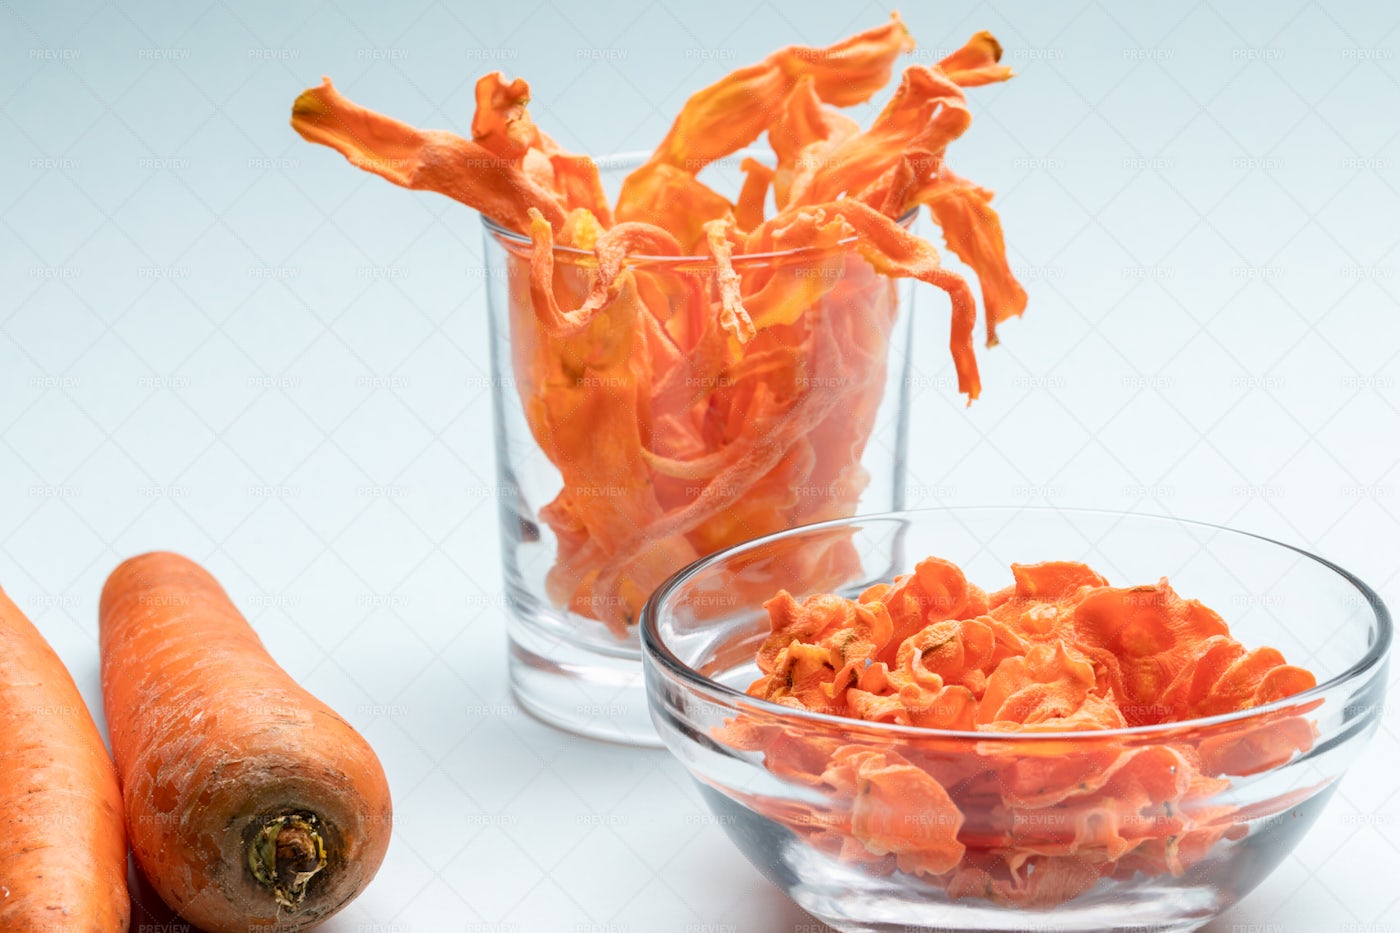 Chips Made From Carrots: Stock Photos